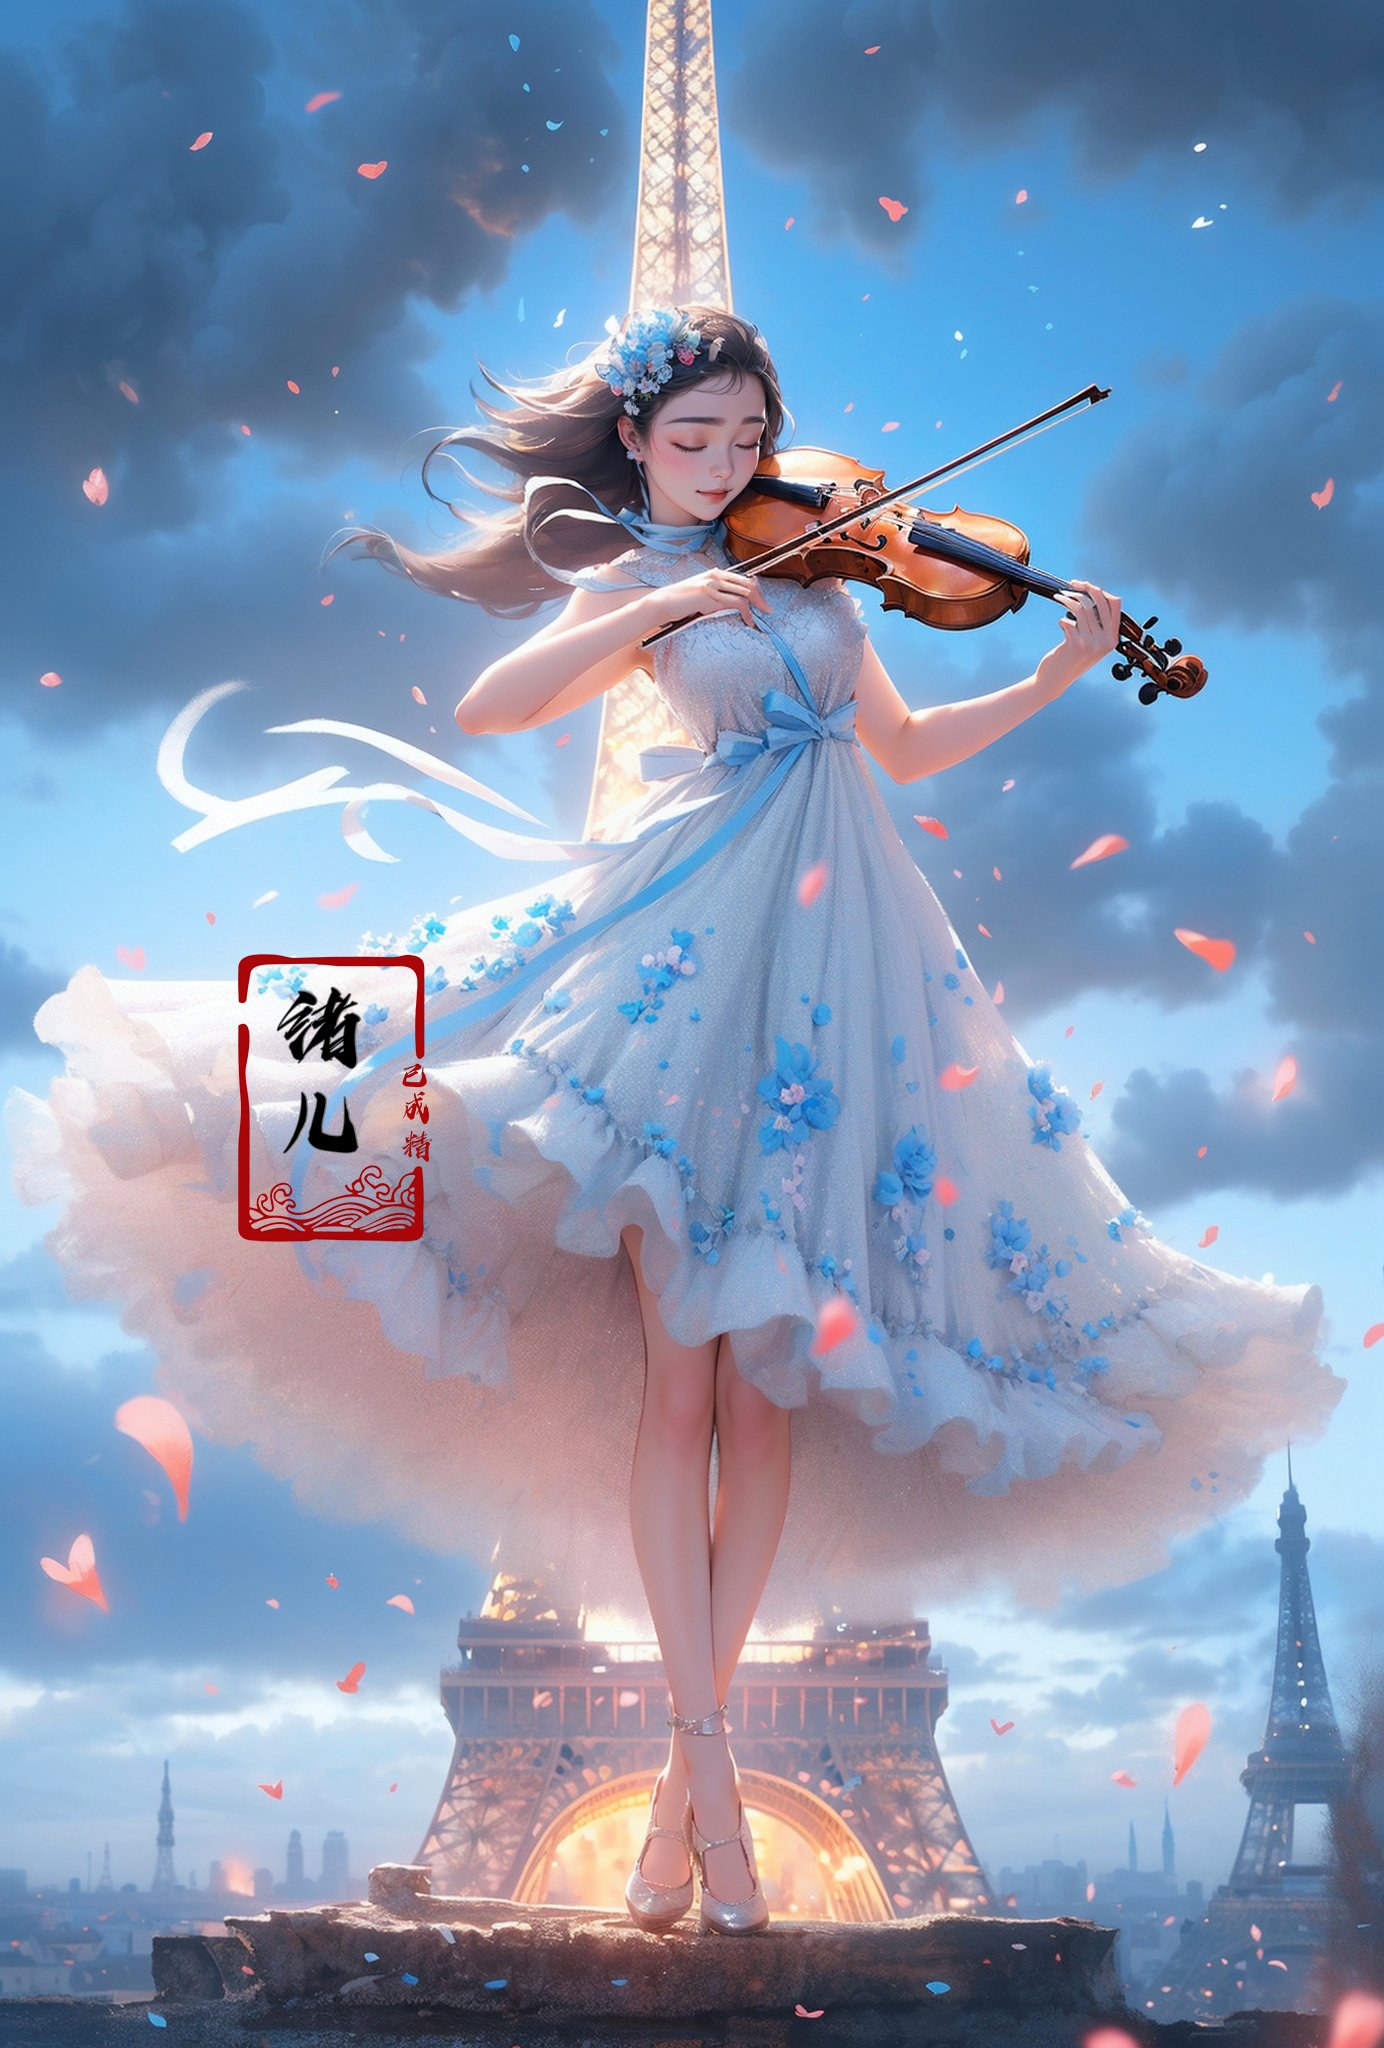 (A girl in a dress is in the air:1.3), playing a violin, Eiffel Tower background，(wide shot, wide-angle lens,Panoramic:1.2),super vista, super wide Angle，Low Angle shooting, super wide lens, blurry, blurry_background, blurry_foreground, depth_of_field, motion_blur,violin，bare shoulders，petals，White and blue dress，from below，blurry foreground， (Milky skin:1.4),(Closed eyes:1.3),(full body:1.5),(long legs:1.3),<lora:绪儿-小提琴 violin:0.8> 